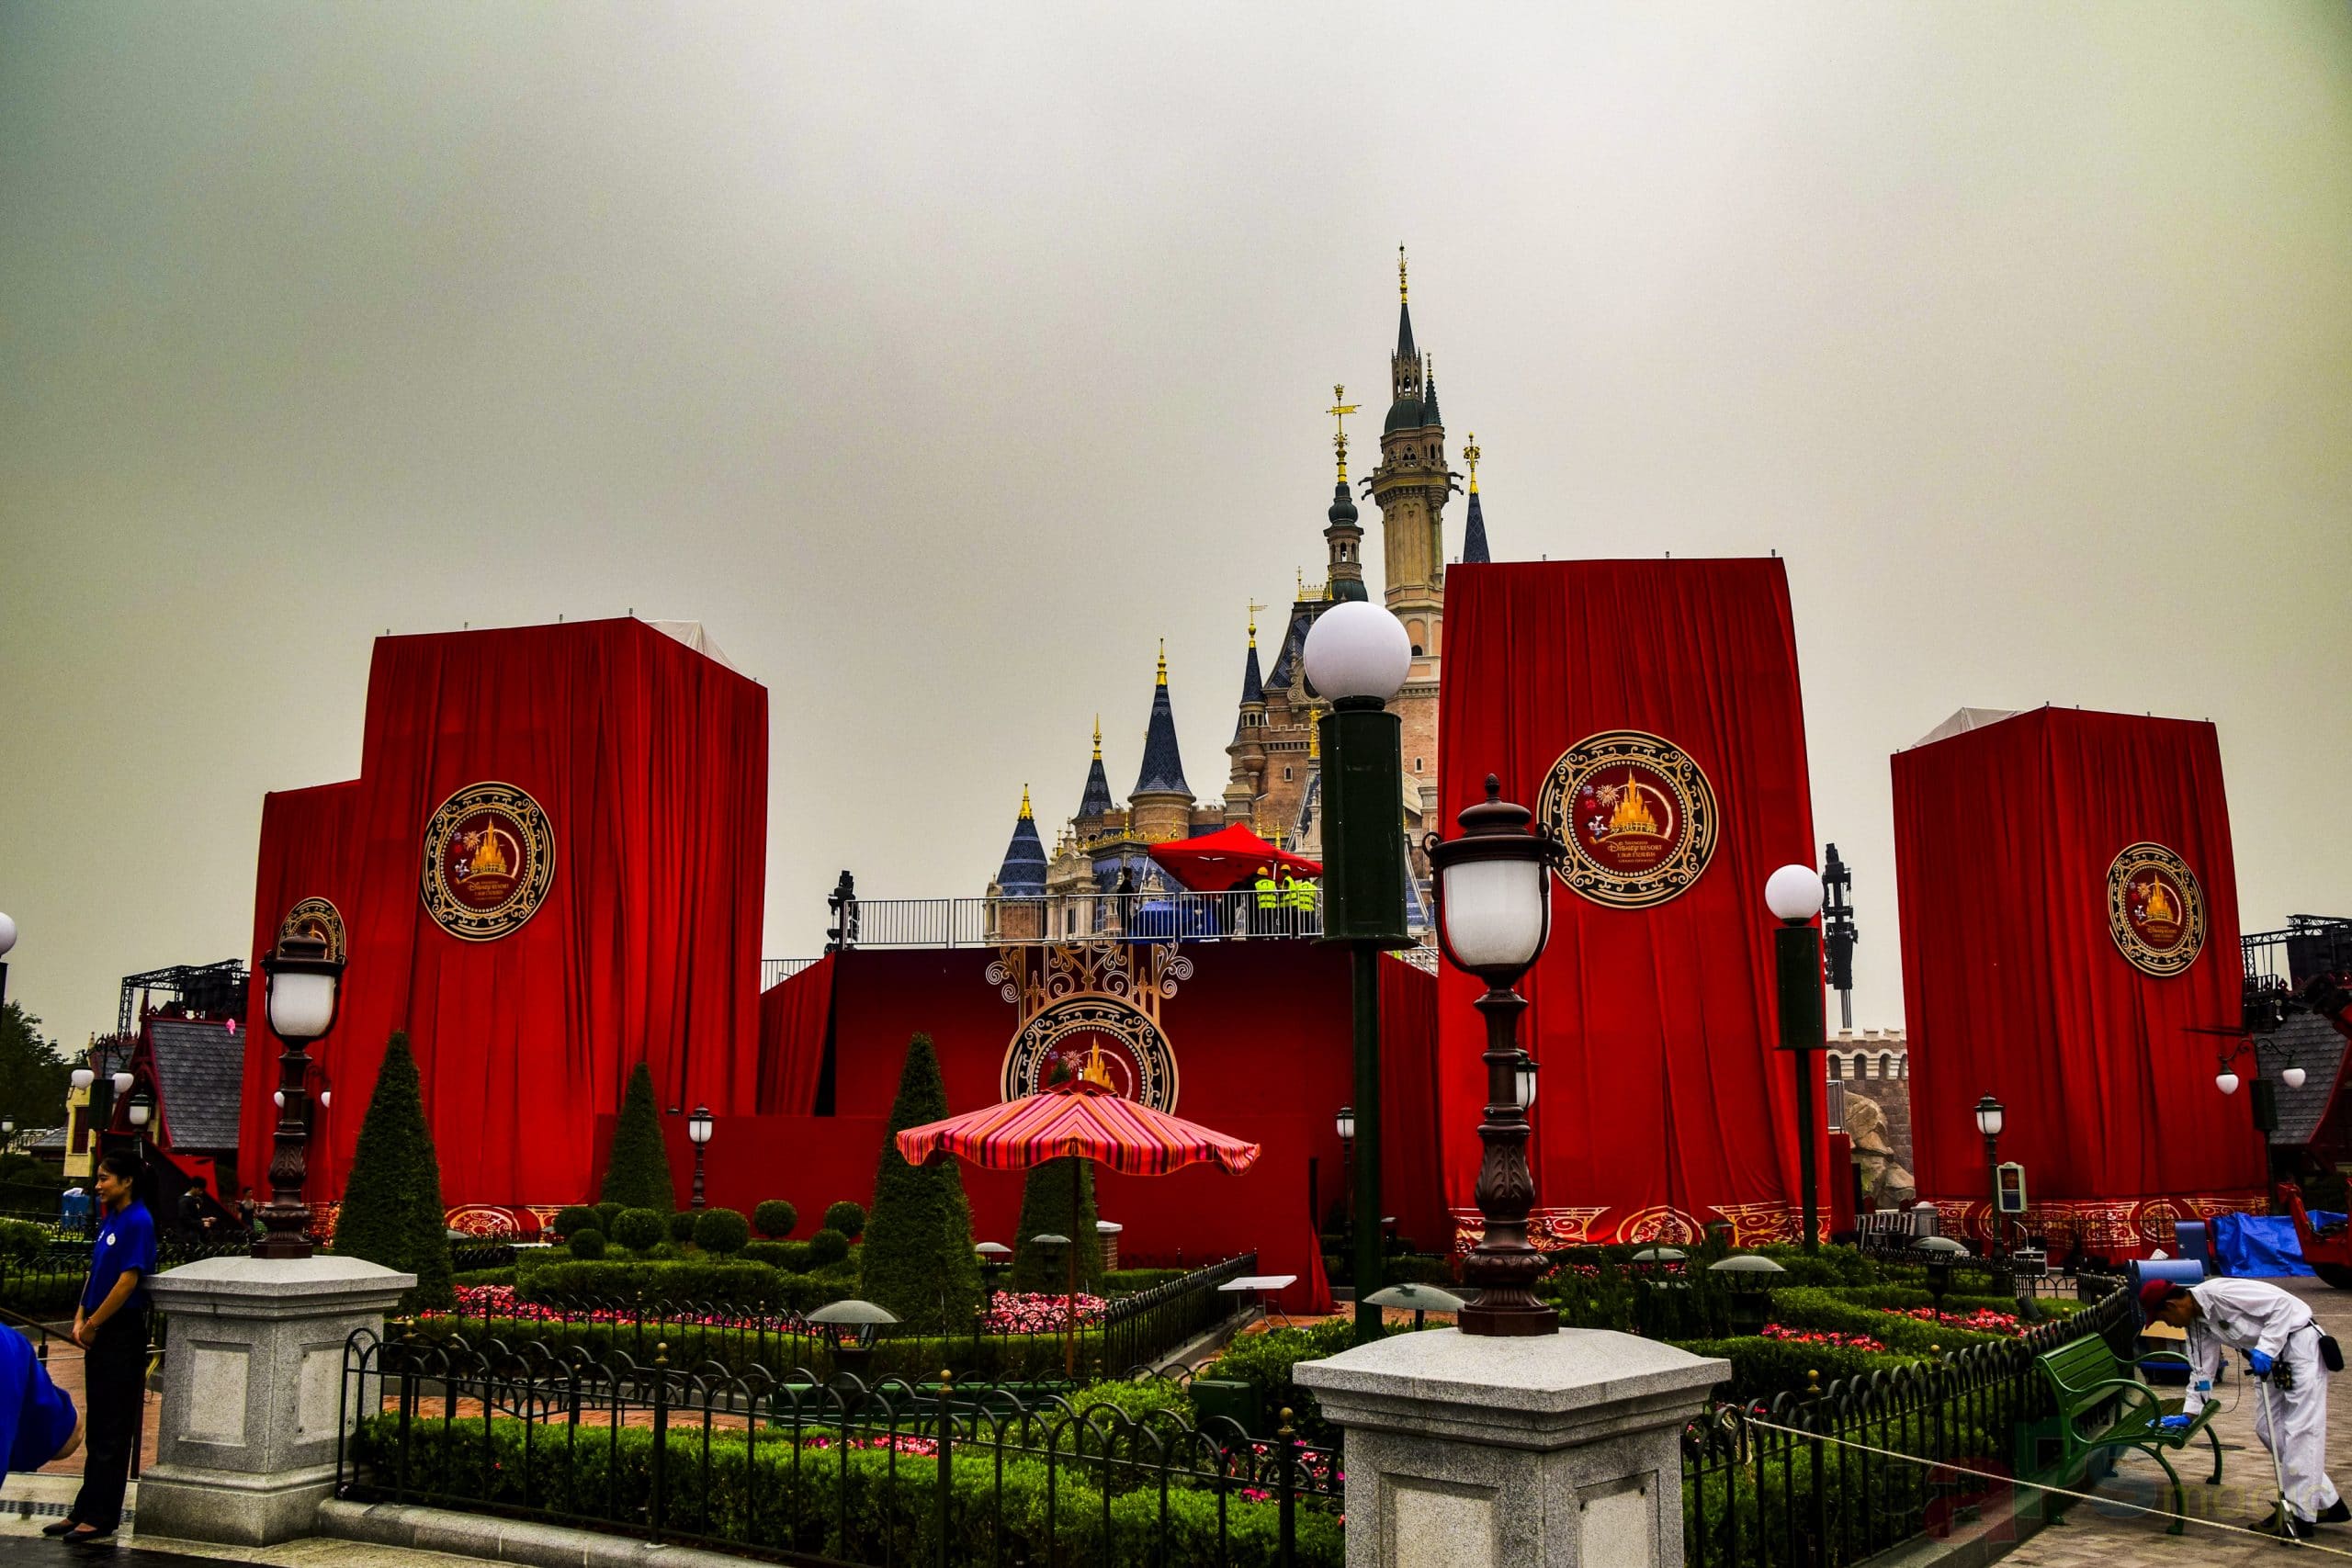 Shanghai Disneyland Grand Opening Five Years Ago – Reflecting on a Momentous Day